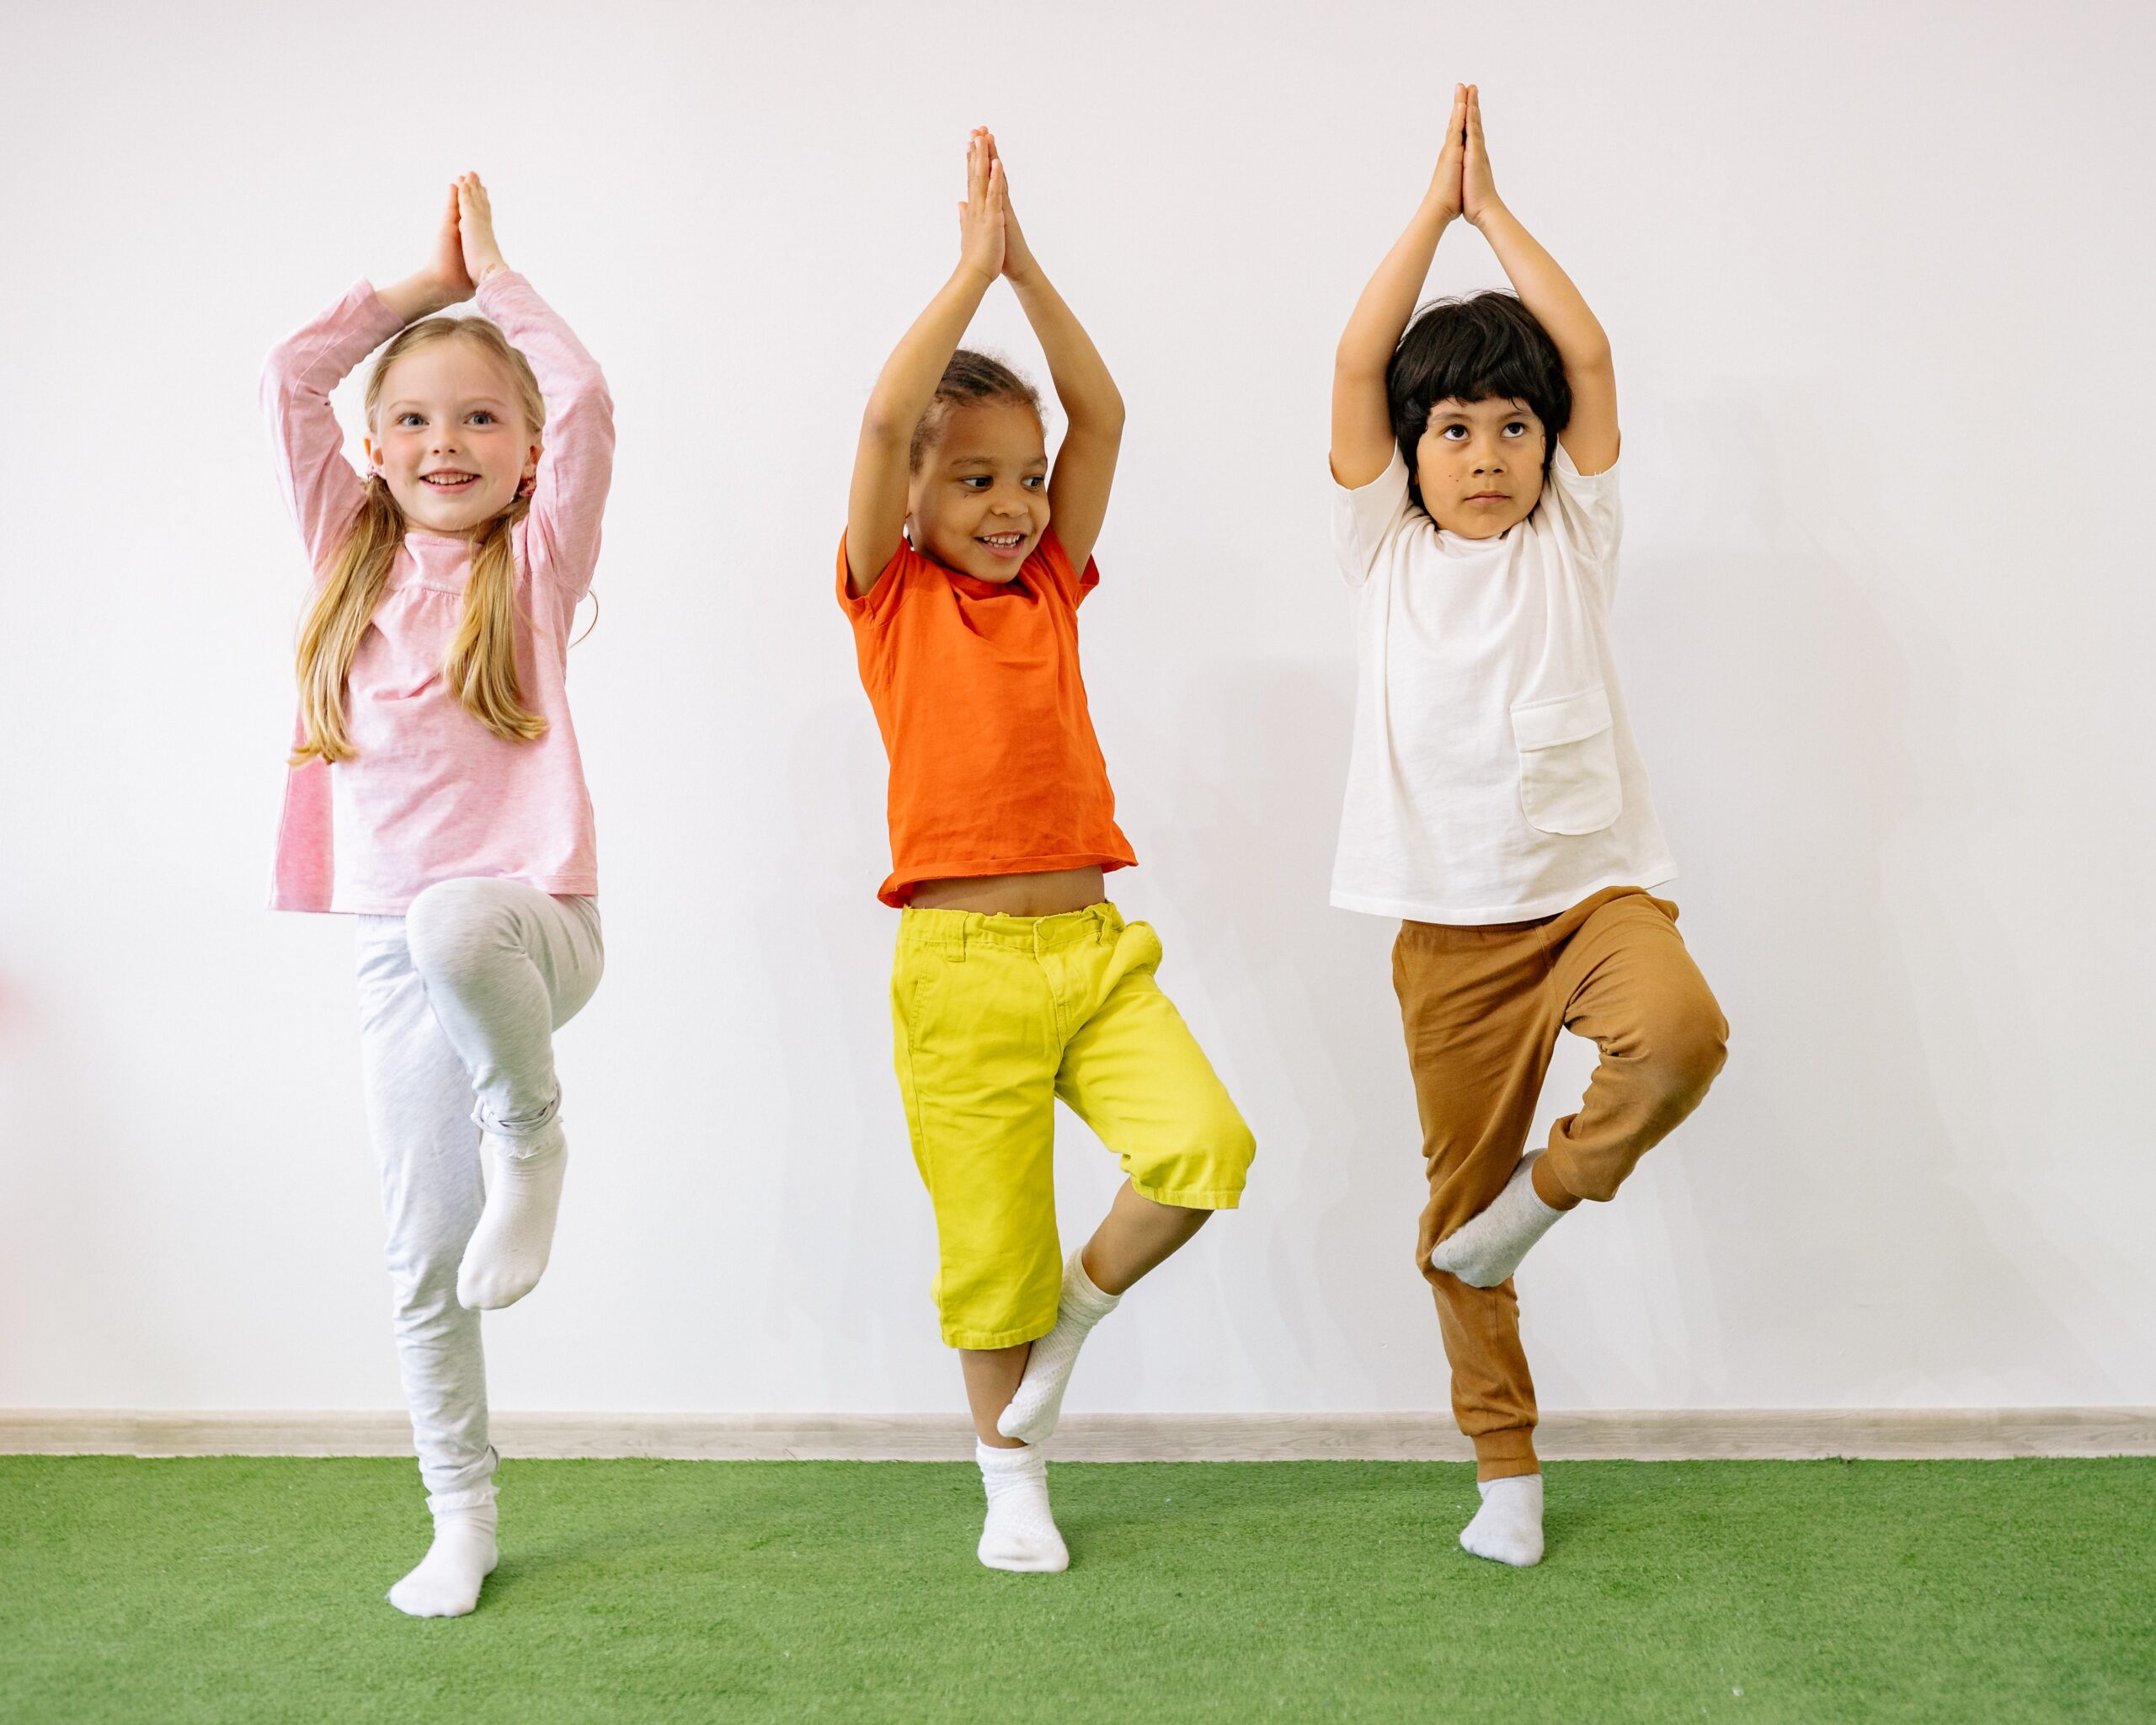 3 young children hold gymnastic balance pose.